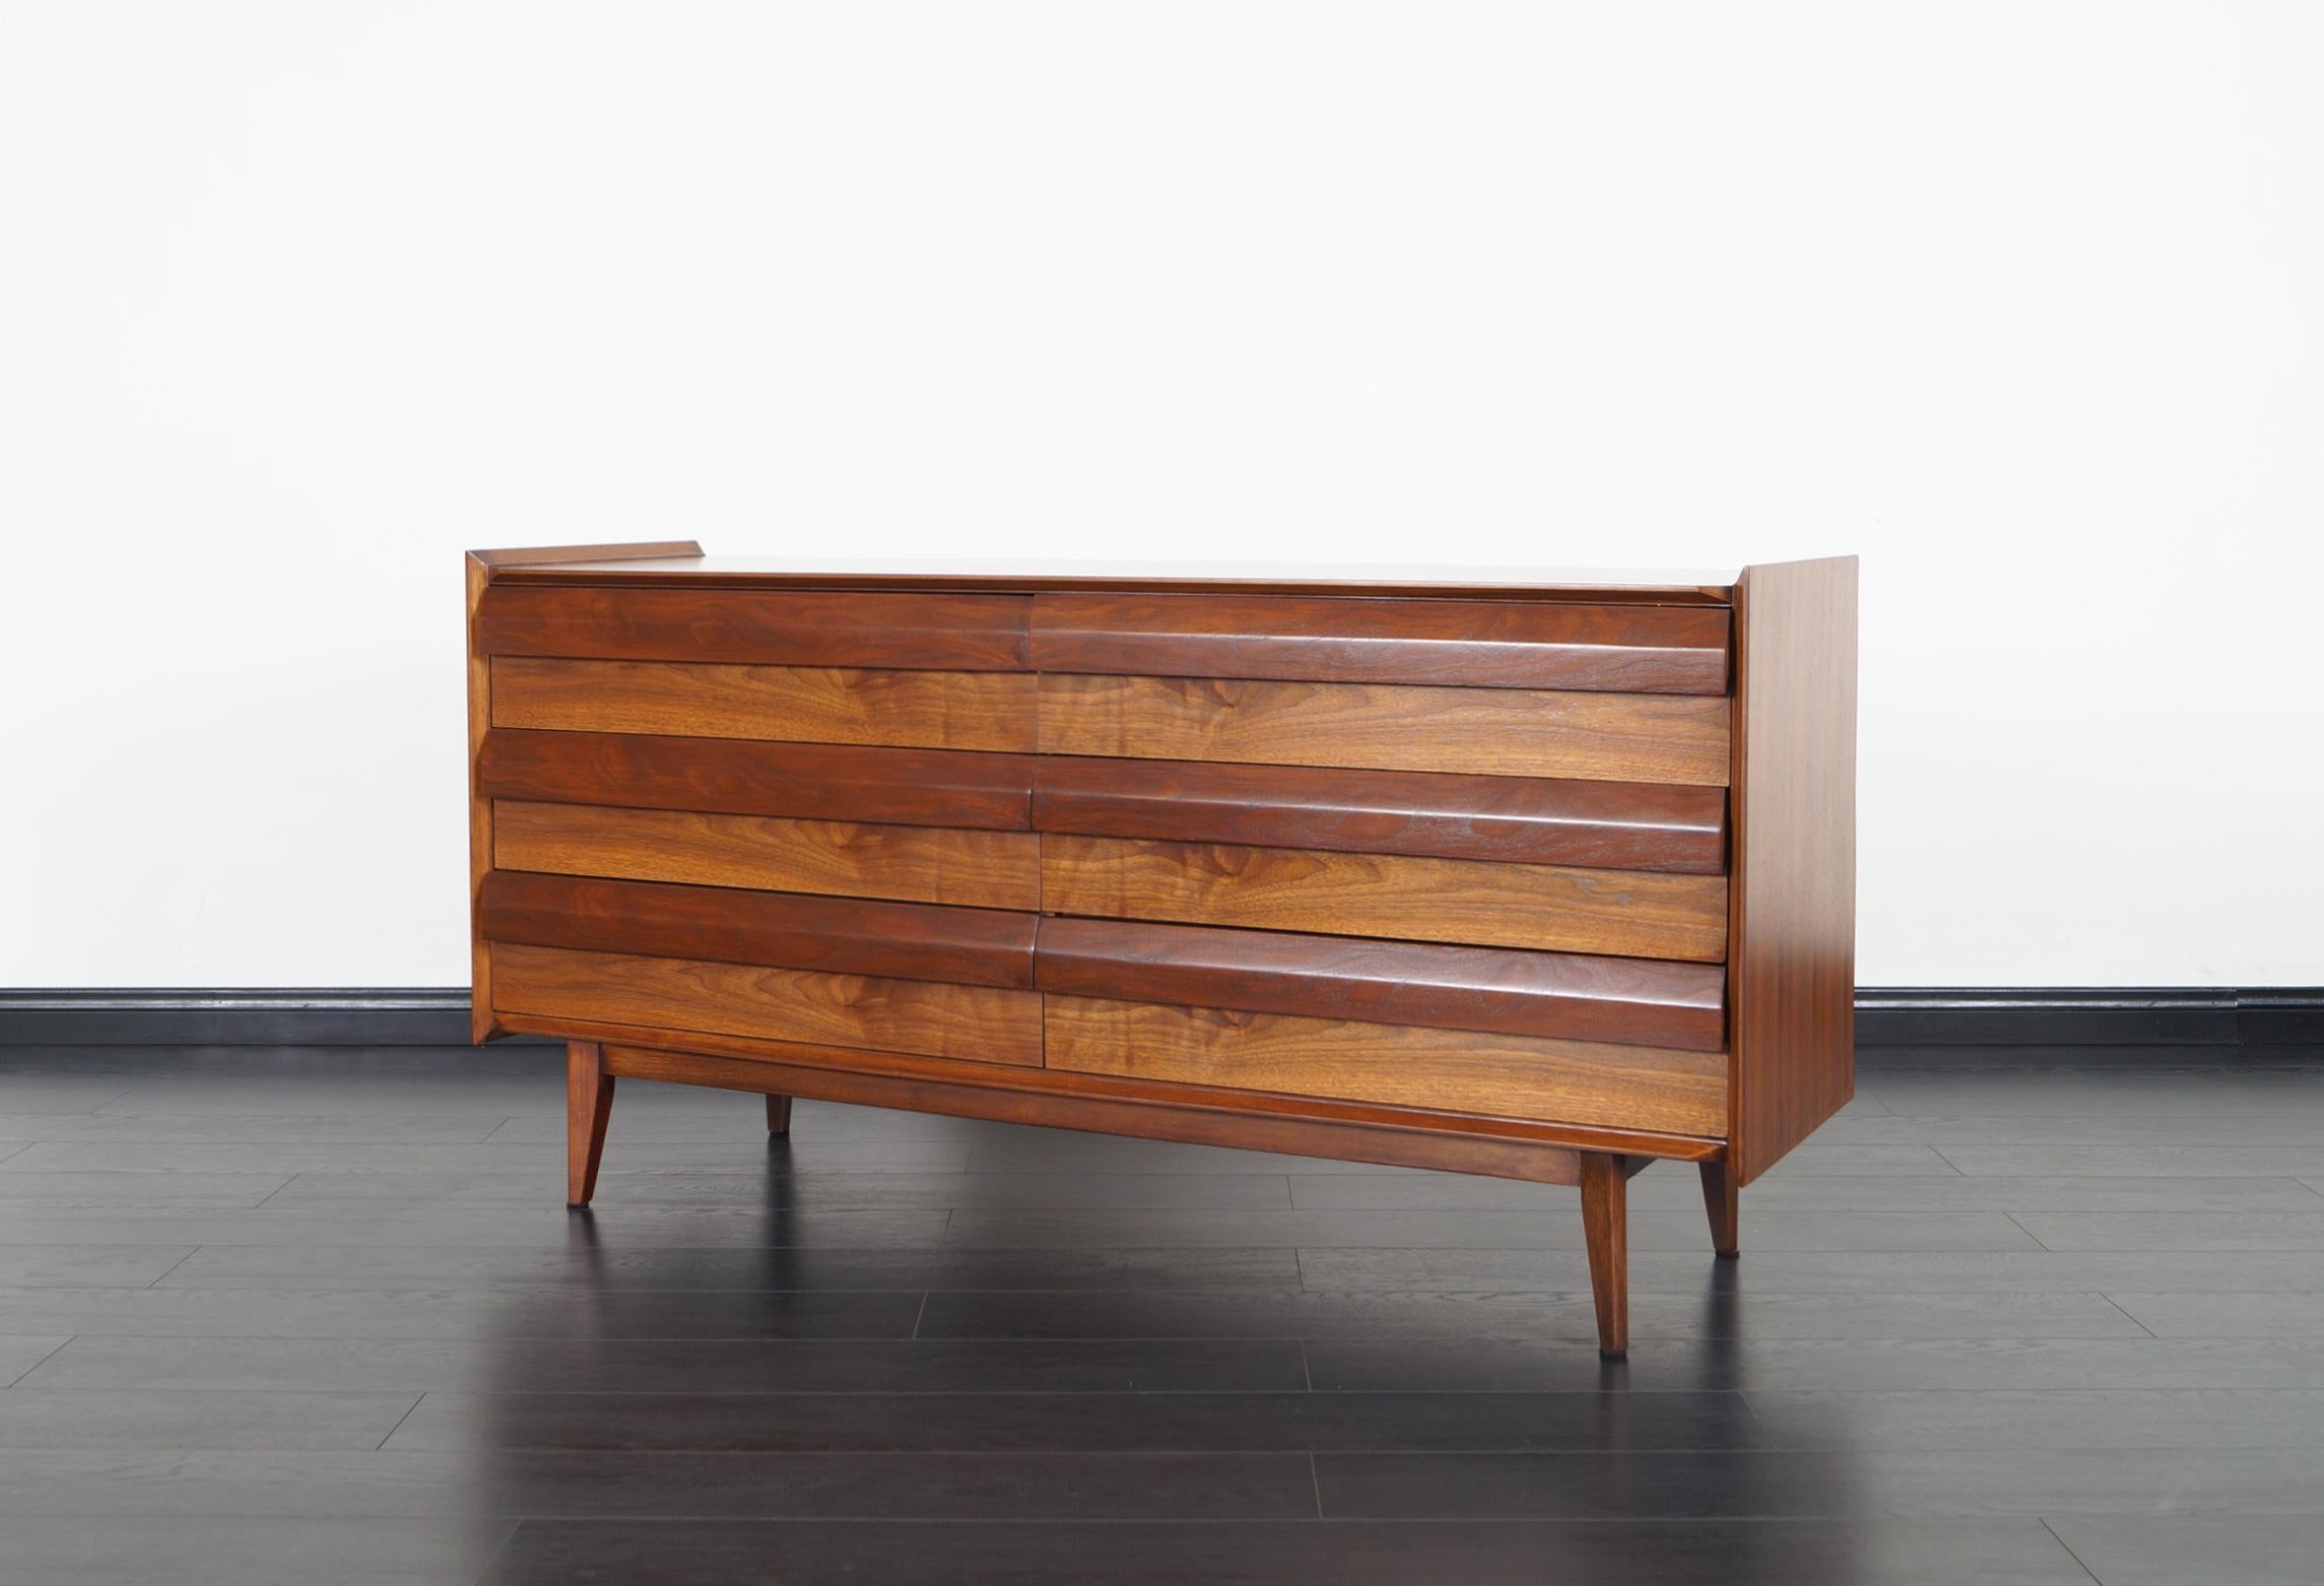 Modernist walnut dresser by Lane Furniture. Features six dovetail drawers with sculptural handles.